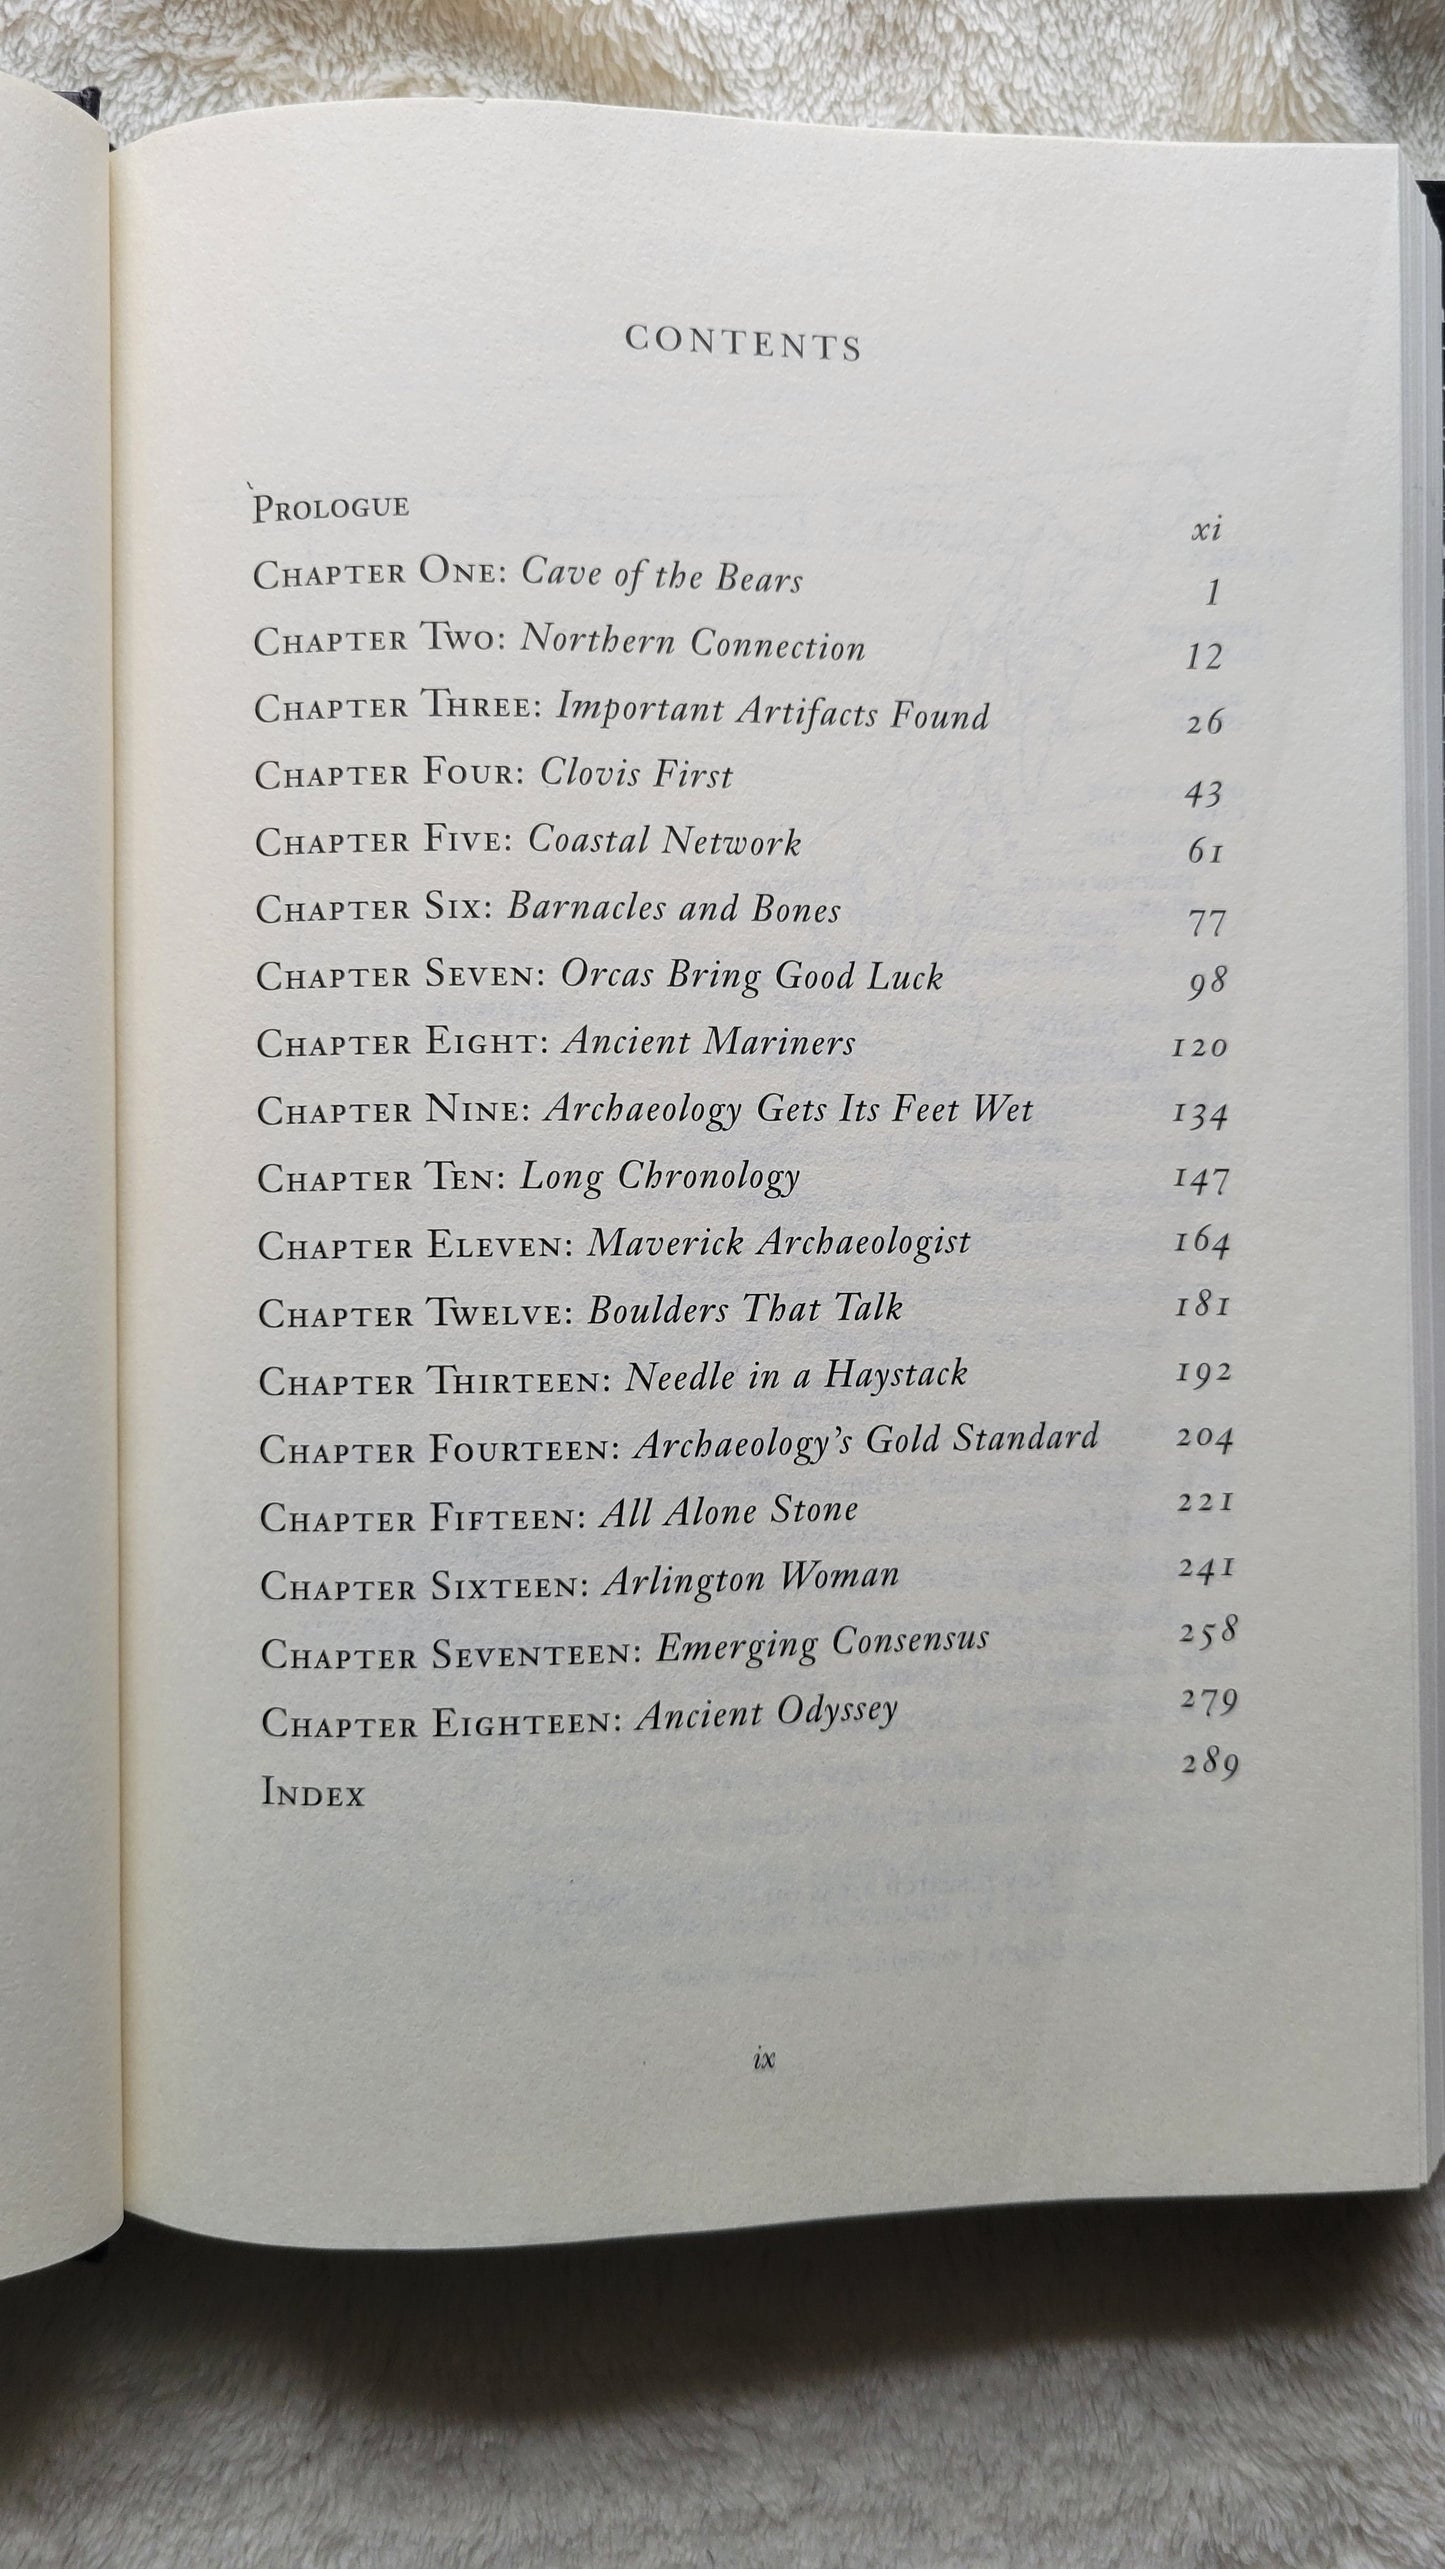 Used book for sale, "Lost World: Rewriting Prehistory – How New Science is Tracing America’s Ice Age Mariners" written by Tom Koppel, published by Atria Books, 2010. View of table of contents